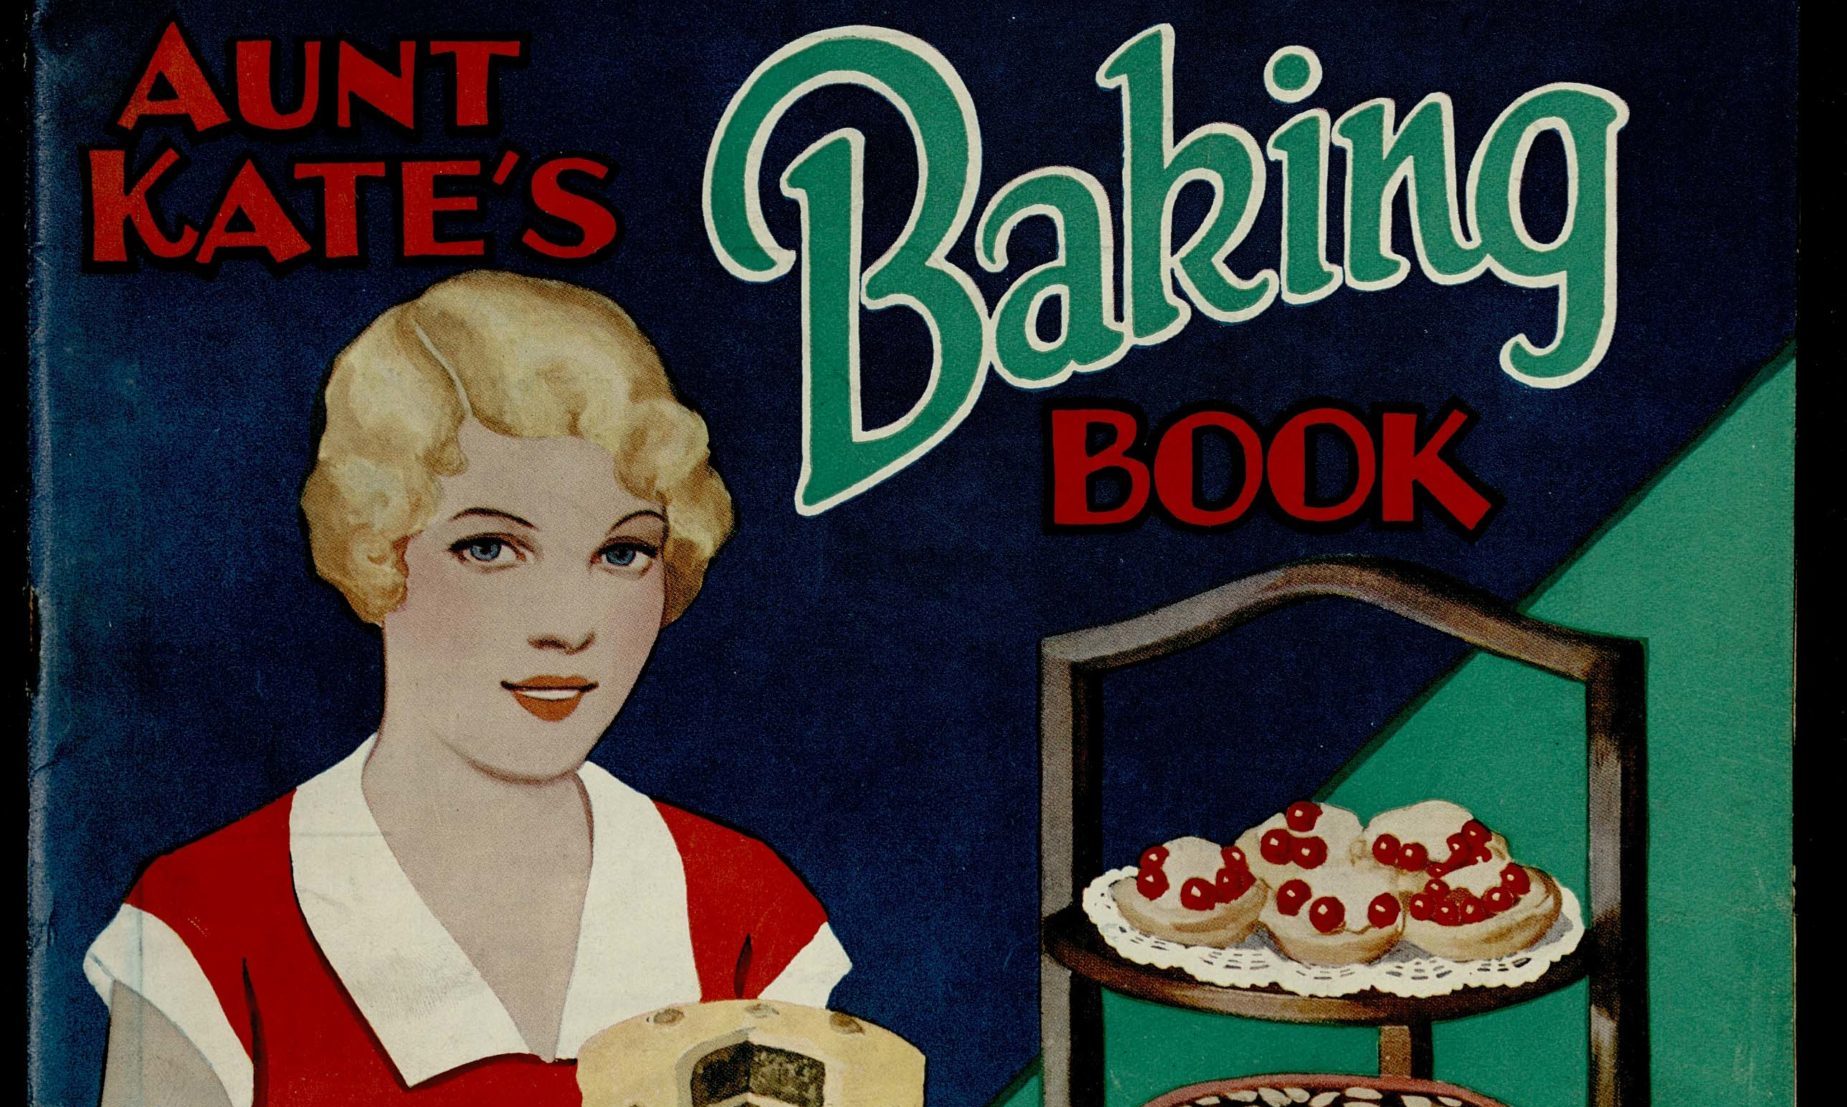 Aunt Kate's Baking Book 1933.